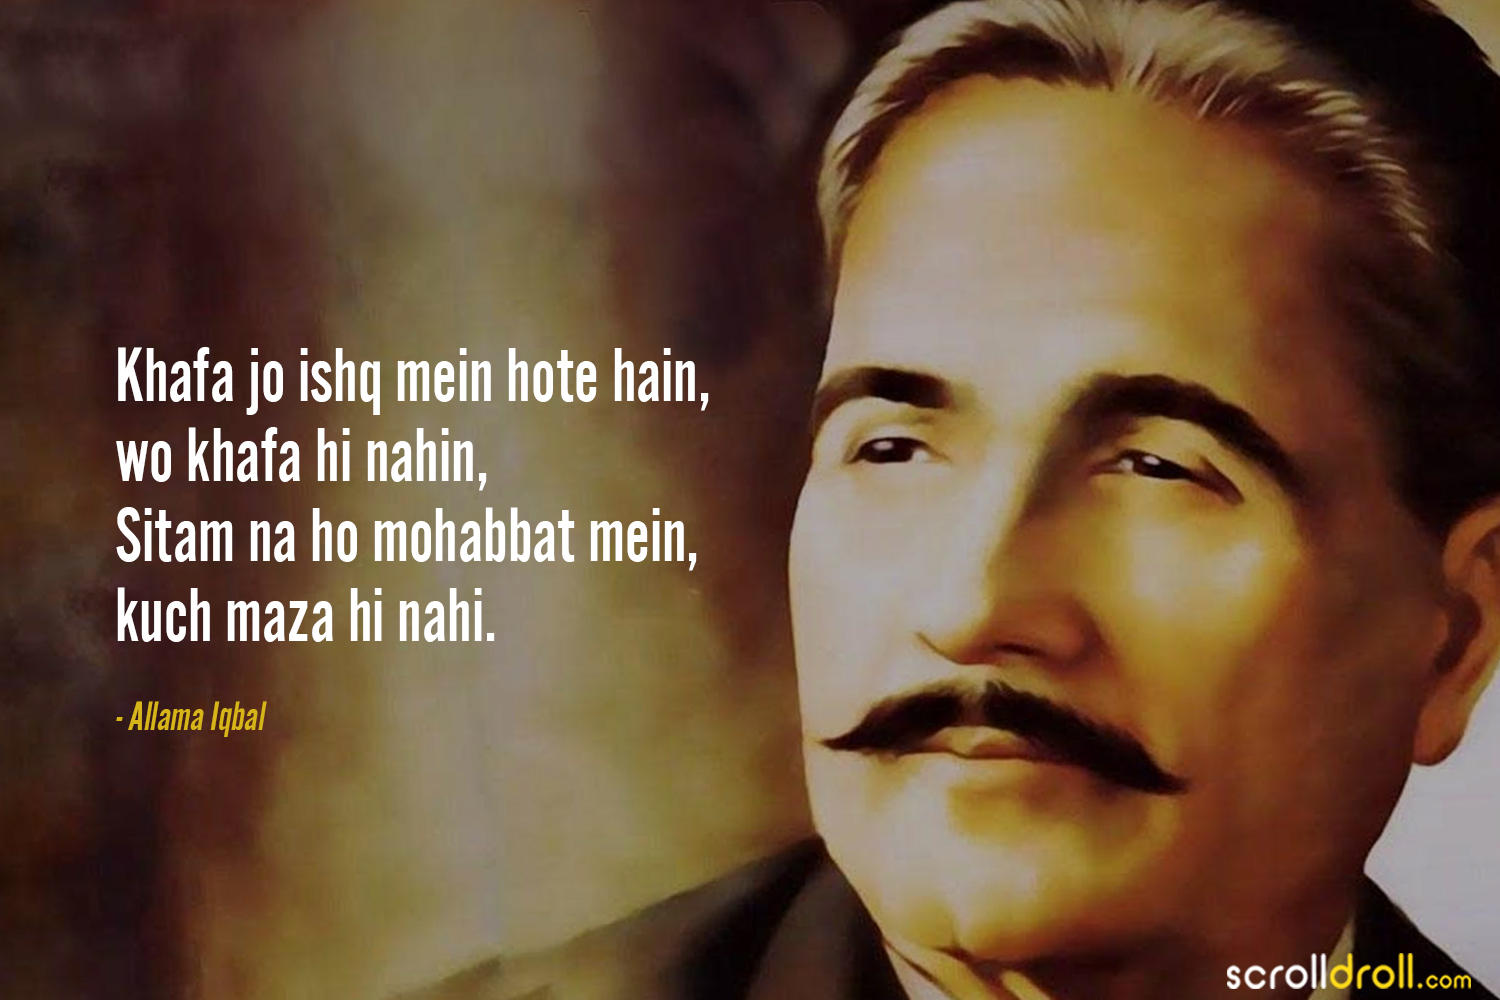 Shayaris-By-Allama-Iqbal-7 - The Best of Indian Pop Culture ...